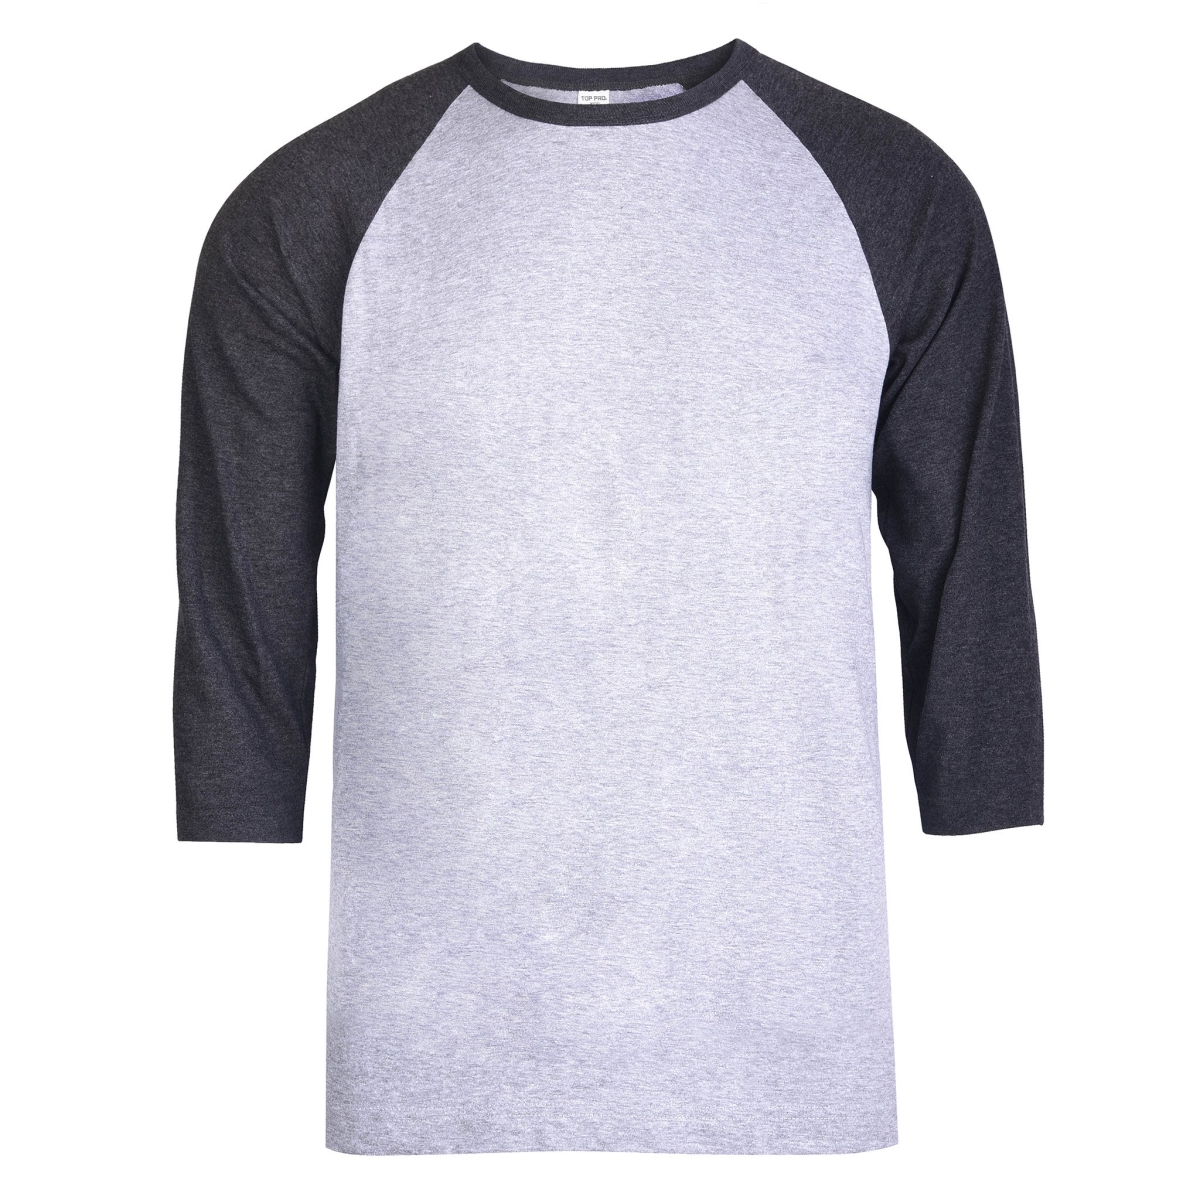 Picture of 247 Frenzy 247-MBT001 CGY-LG Mens Essentials Top Pro 0.75 Sleeve Raglan Baseball T-Shirt&#44; Charcoal & Heather Gray - Large